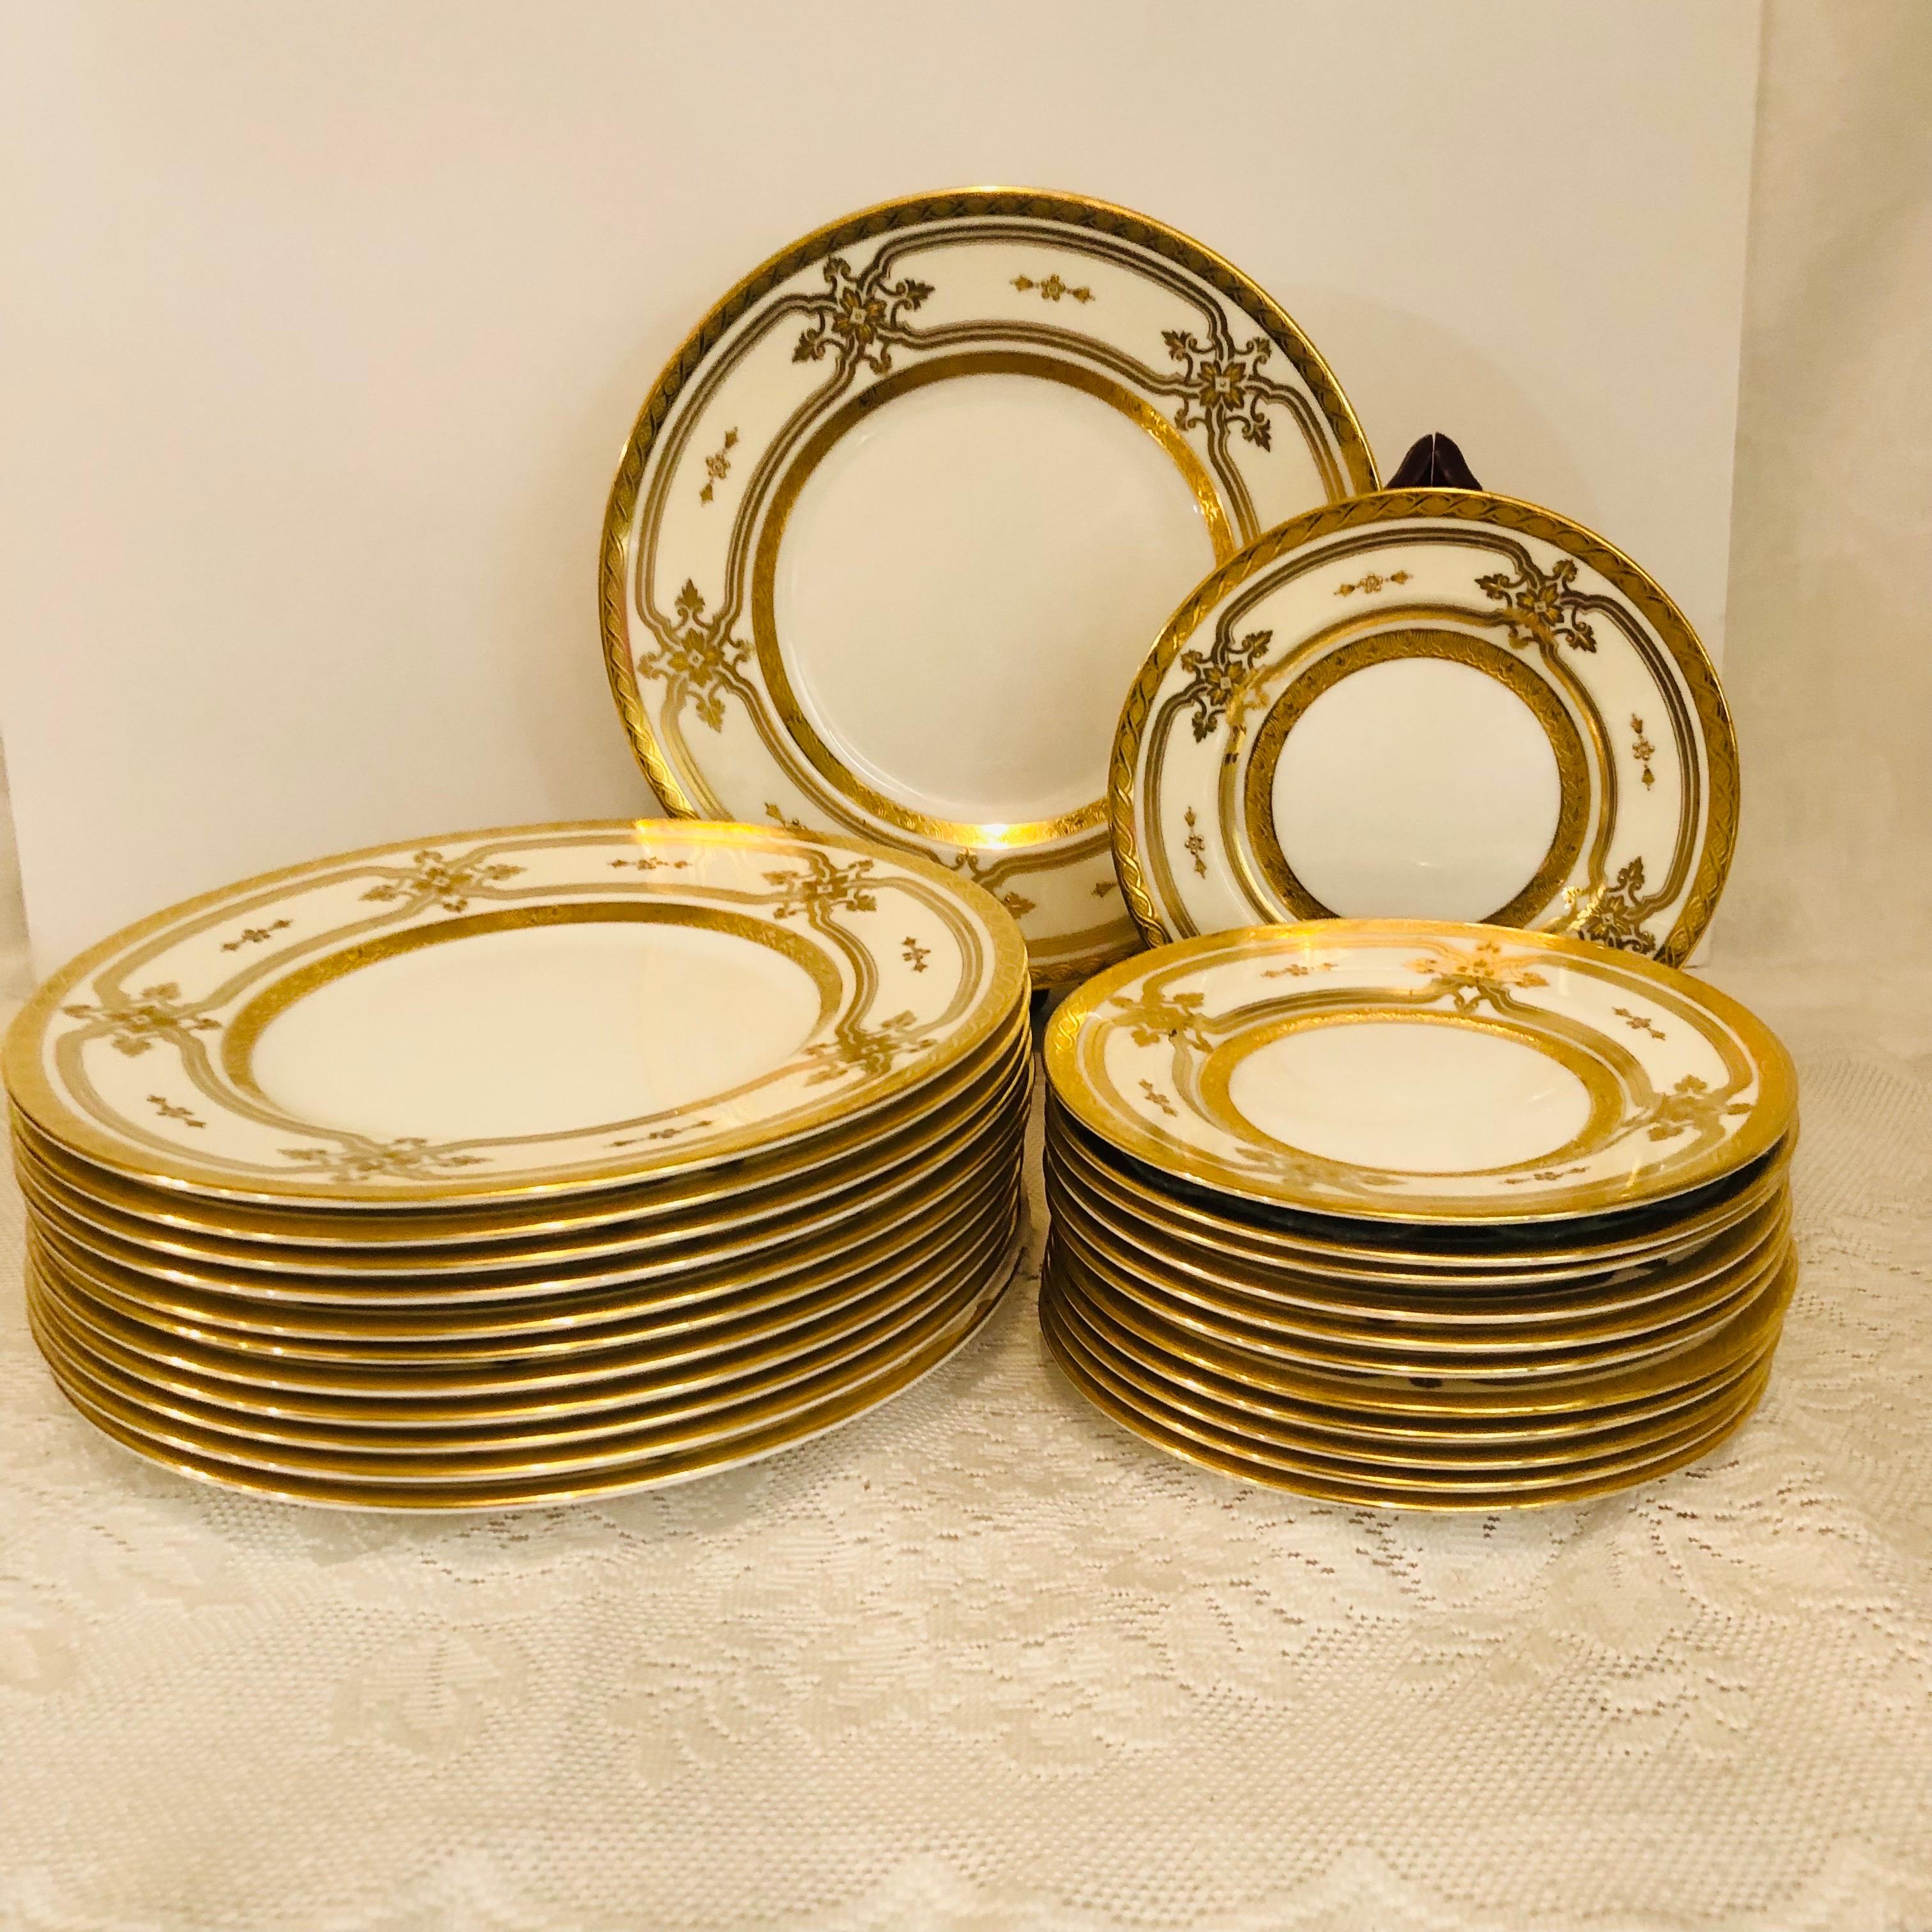 Set of Minton Made for Tiffany & Co. Plates with 12 Luncheon and 12 Bread Plates 1